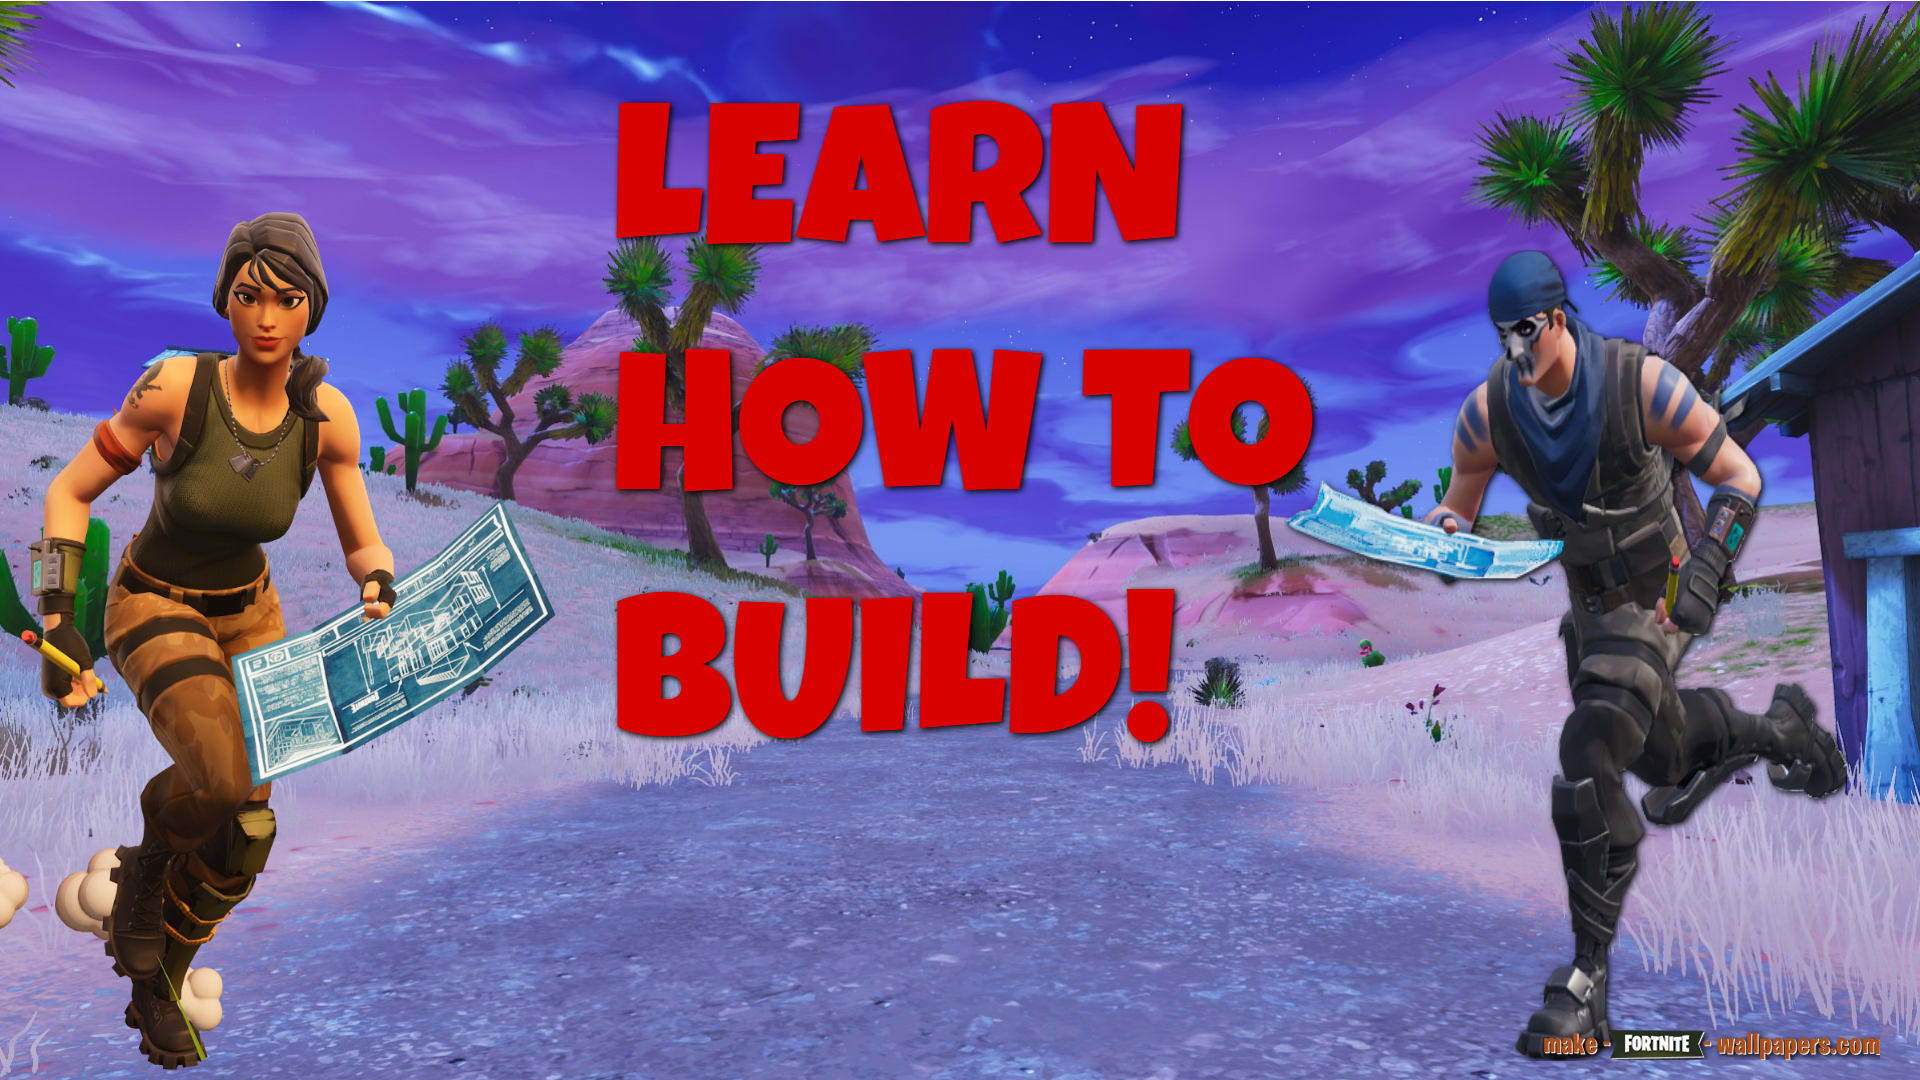 Fortnite Necessary Skills Teach You The Necessary Skills Needed To Become A Professional Fortnite Player By Adam Ahmed Fiverr